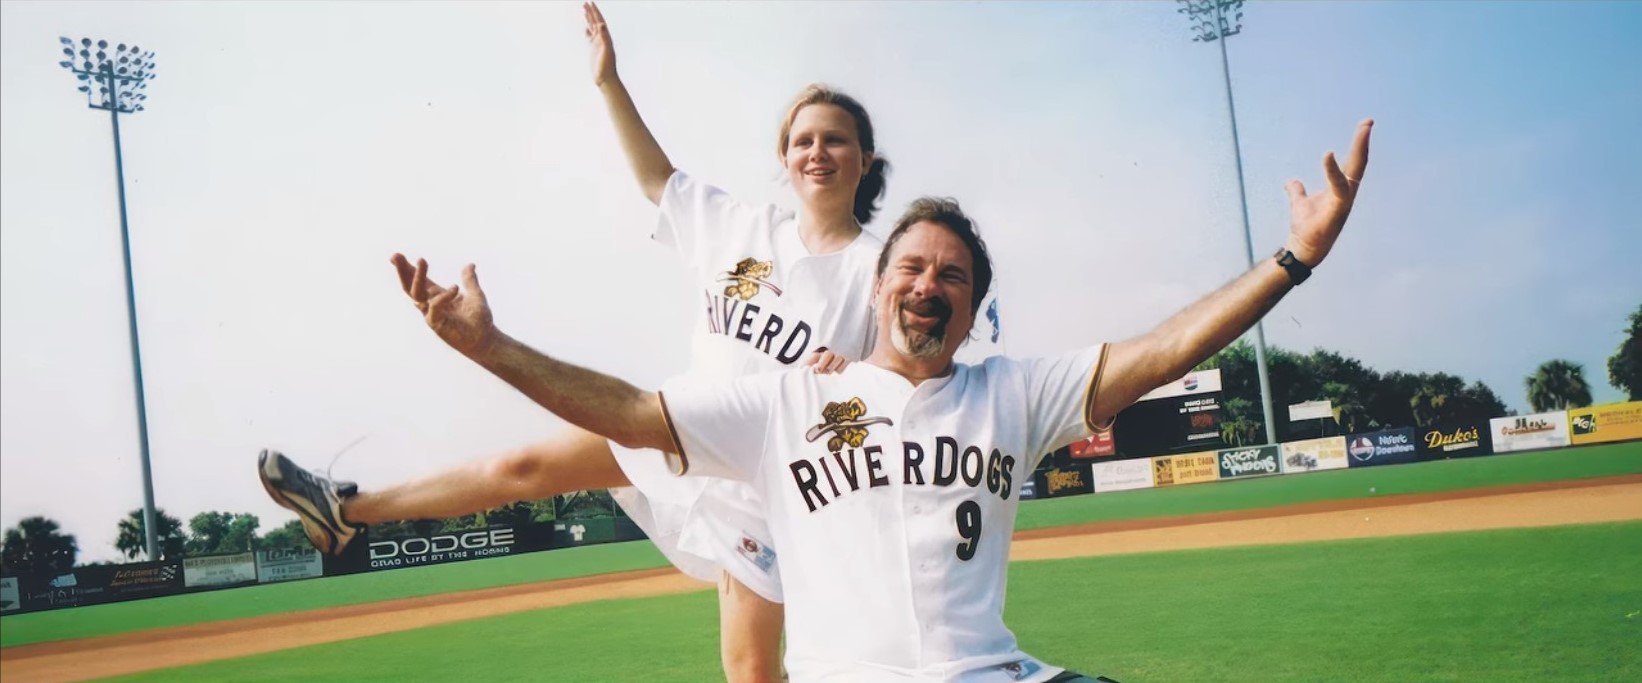 The Saint of Second Chances Review: Mike Veeck’s Life of Fun, Redemption and Parenthood